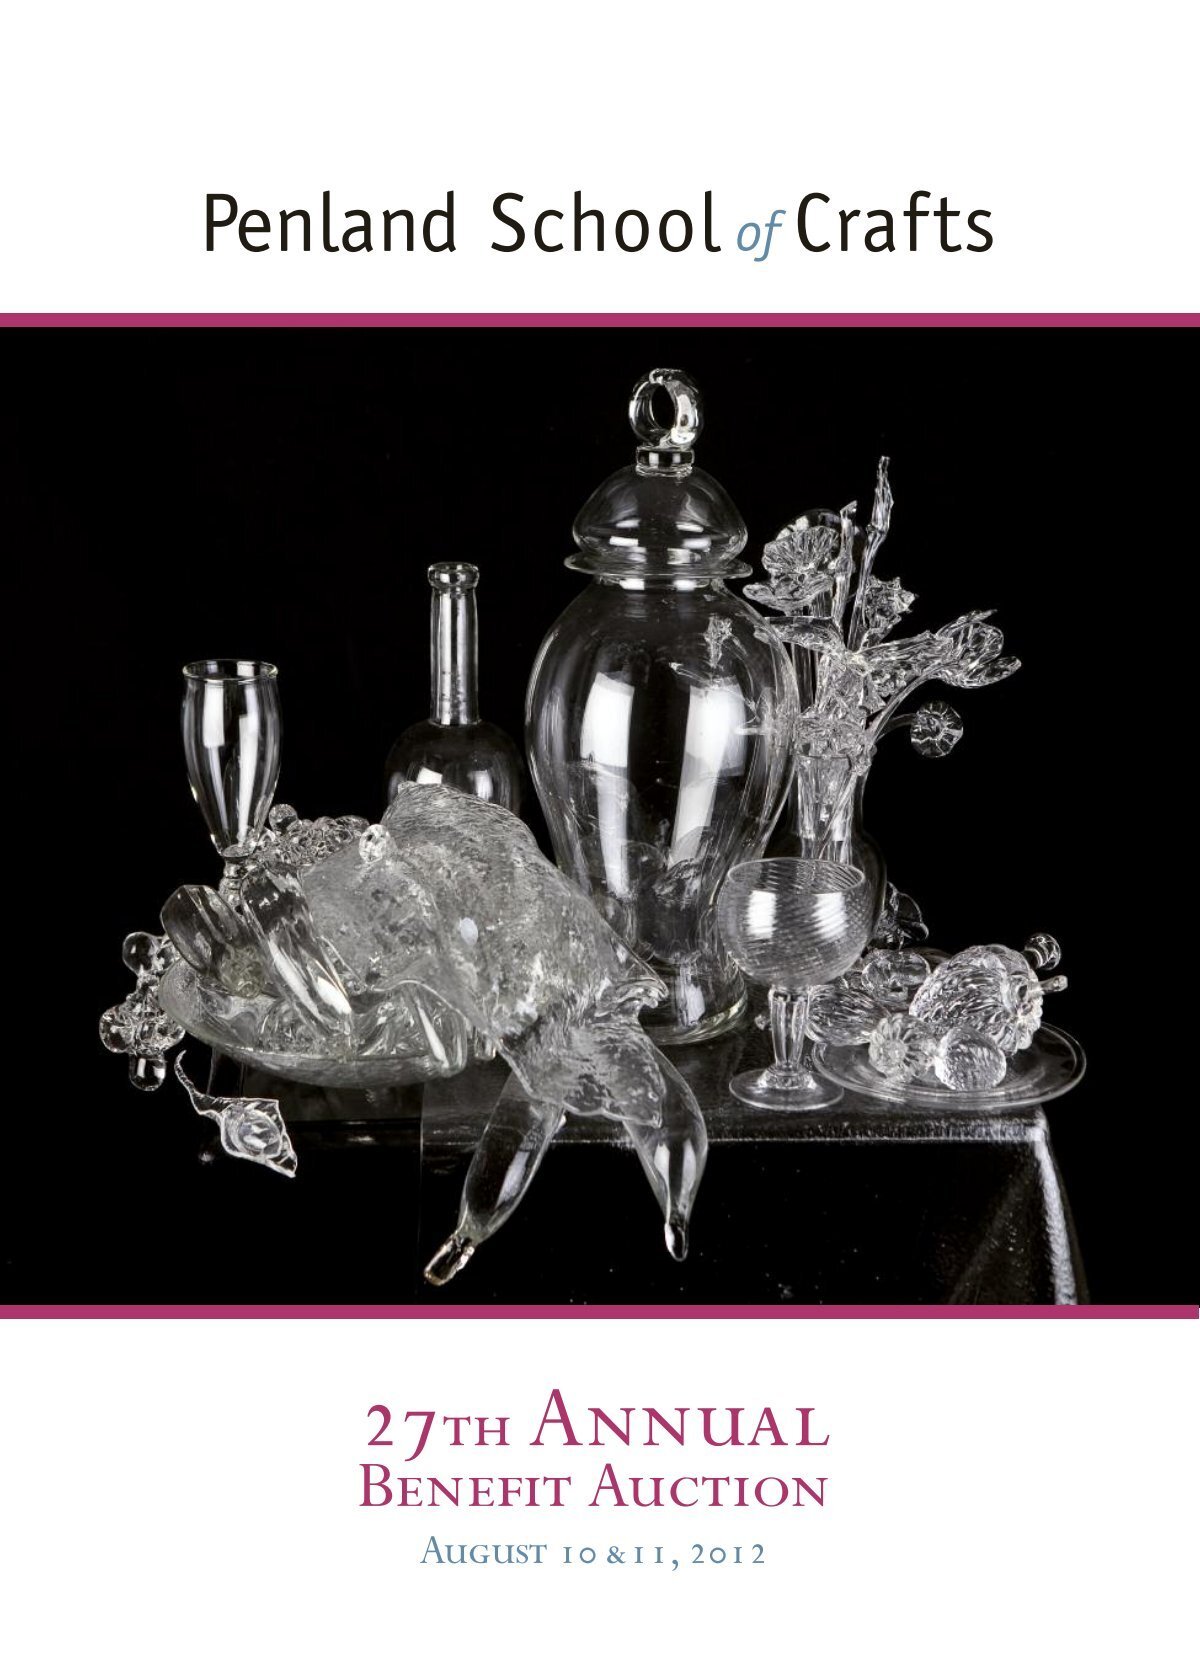 PDF of the complete auction catalog - Penland School of Crafts